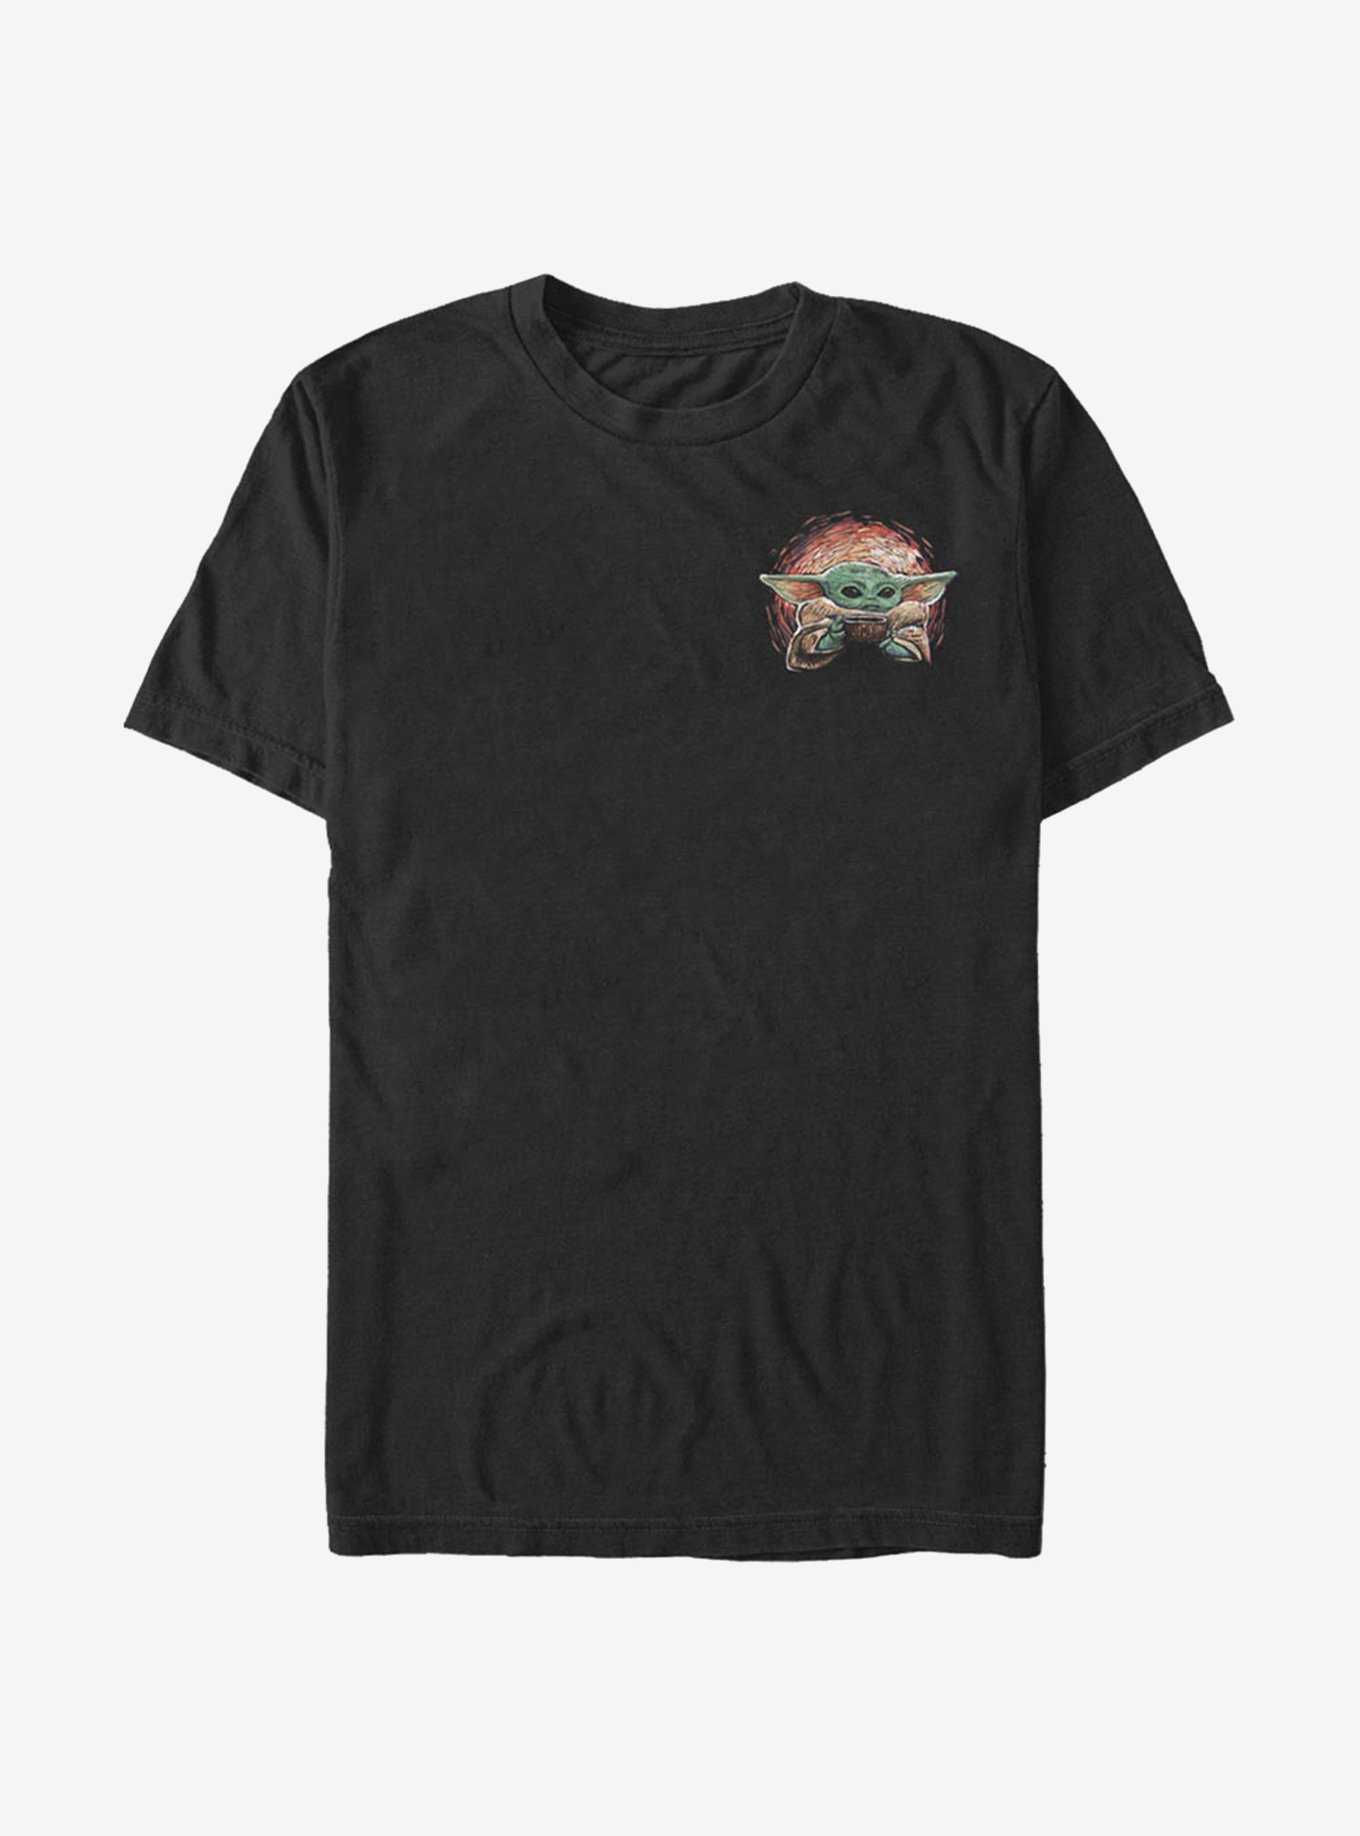 Star Wars The Mandalorian The Child Sipping Stars Badge T-Shirt, , hi-res